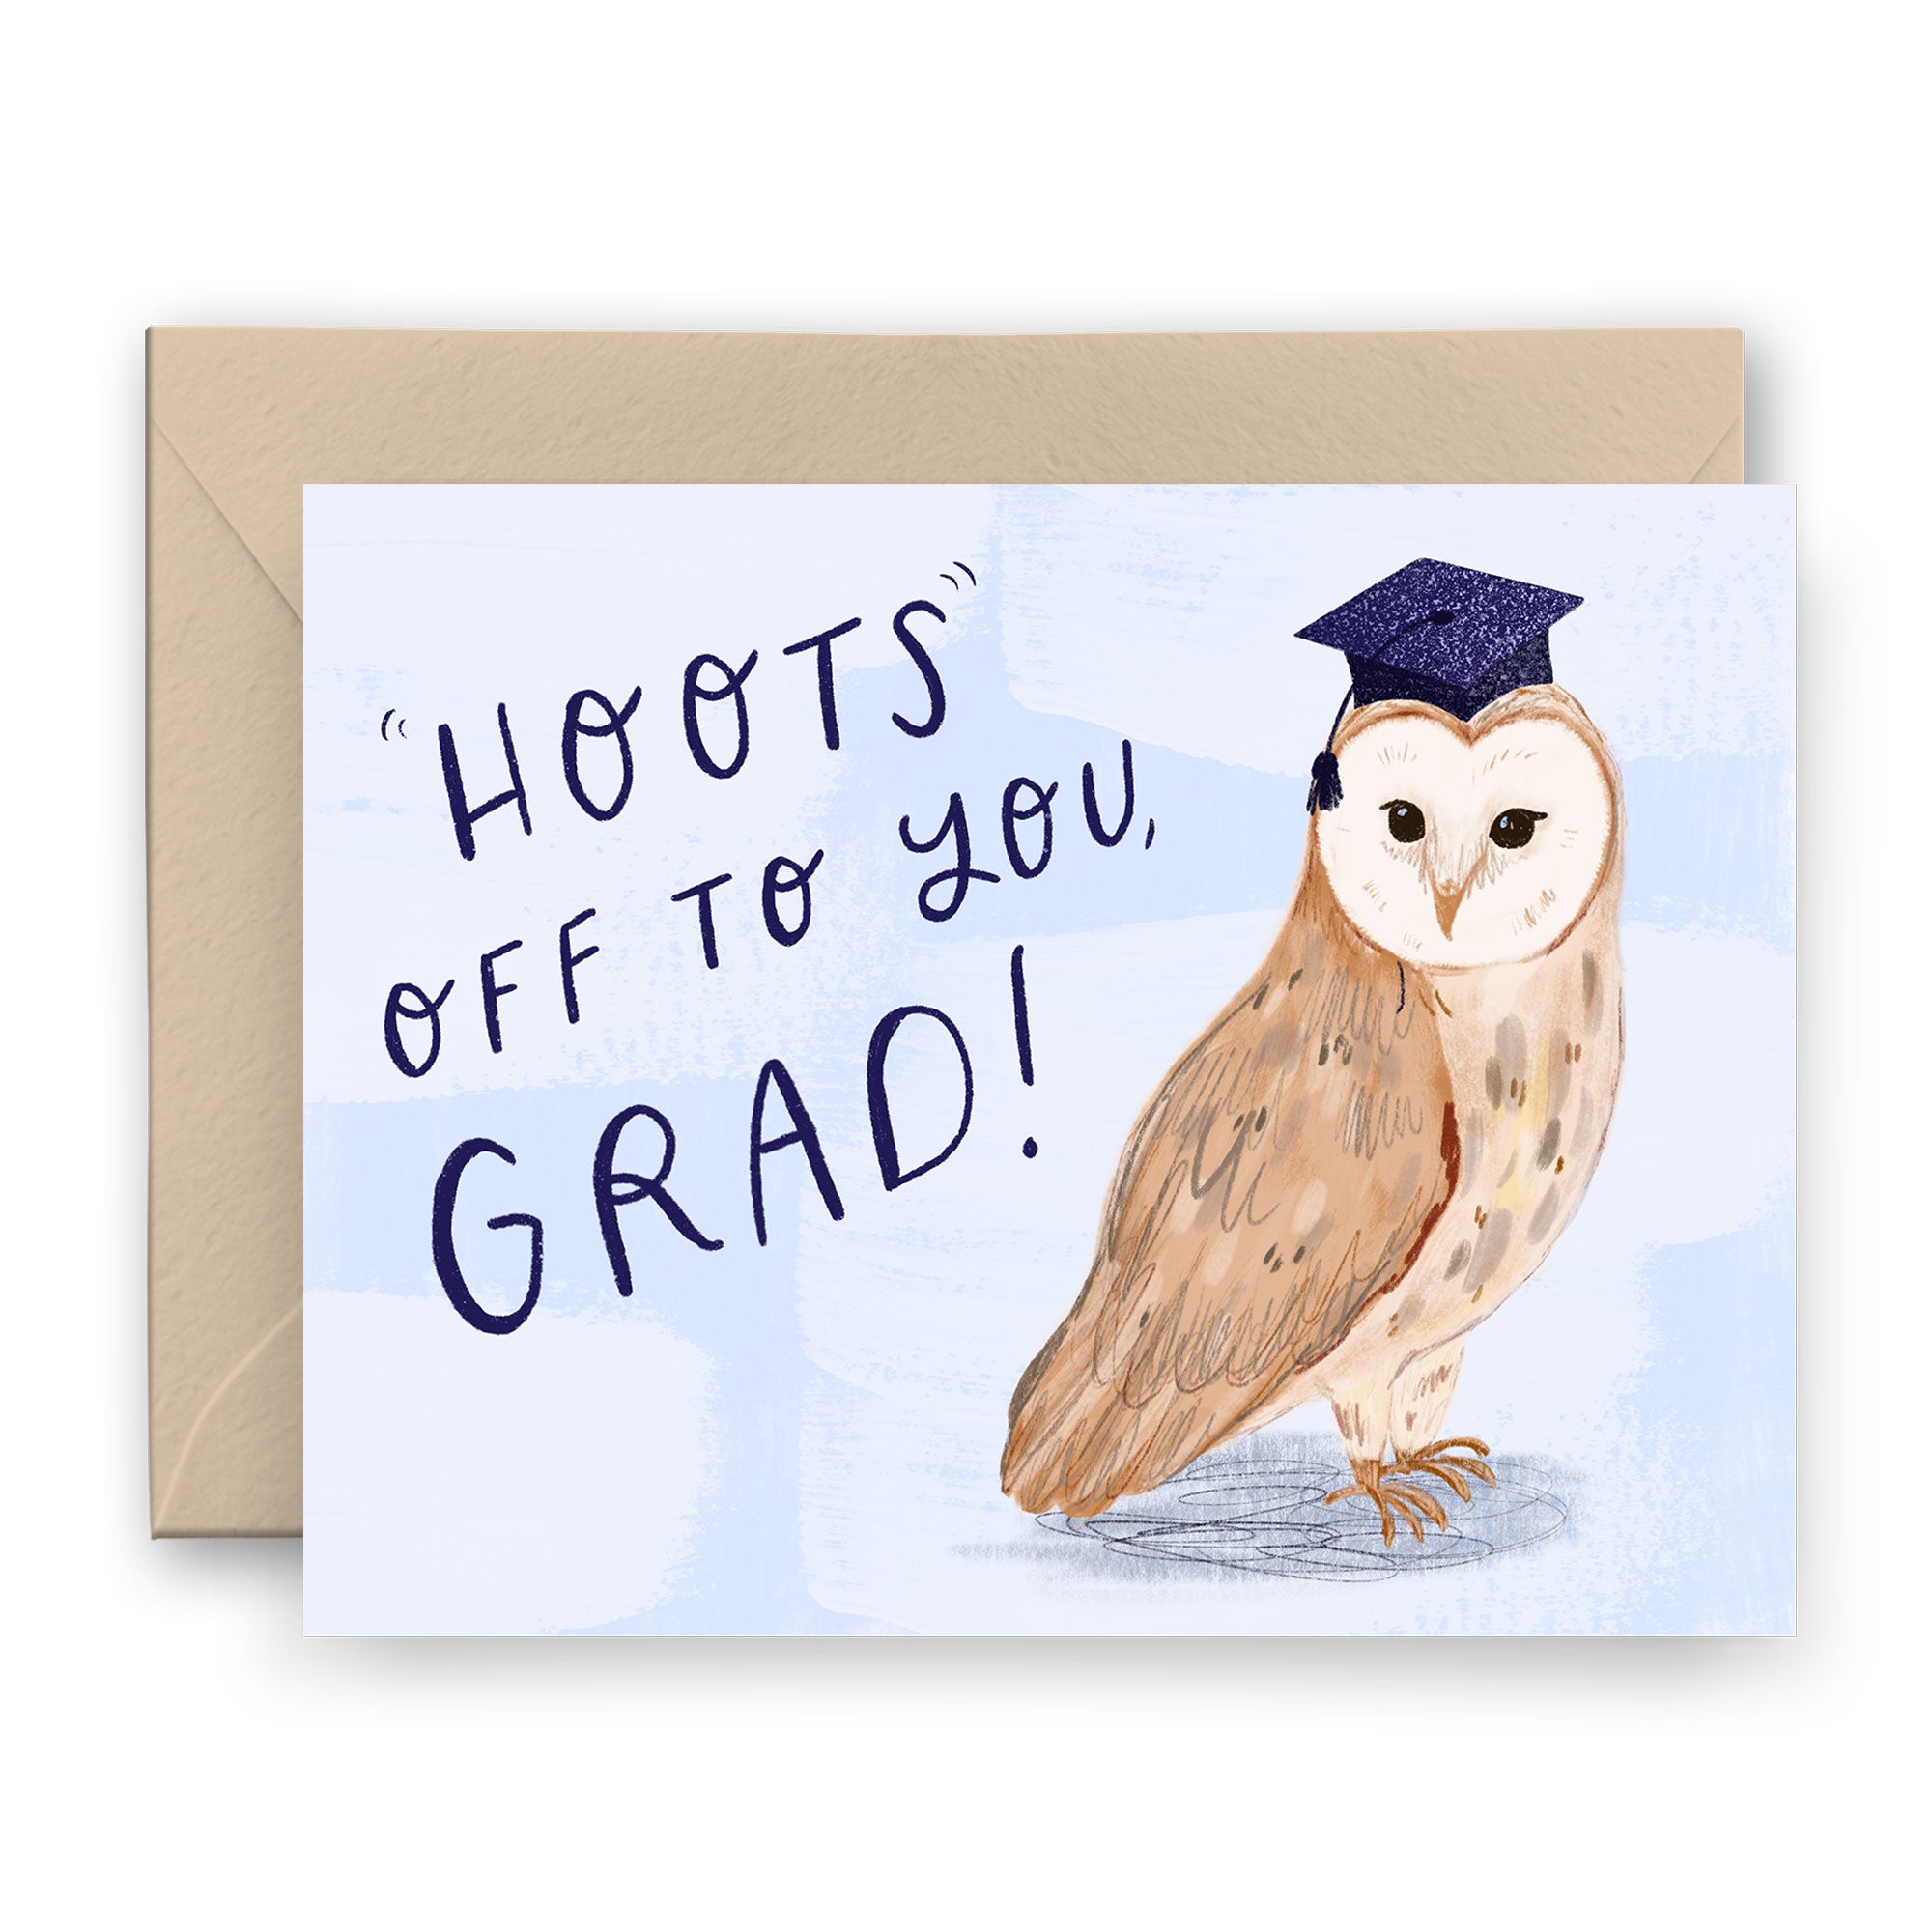 Hoots Off To You, Grad Card